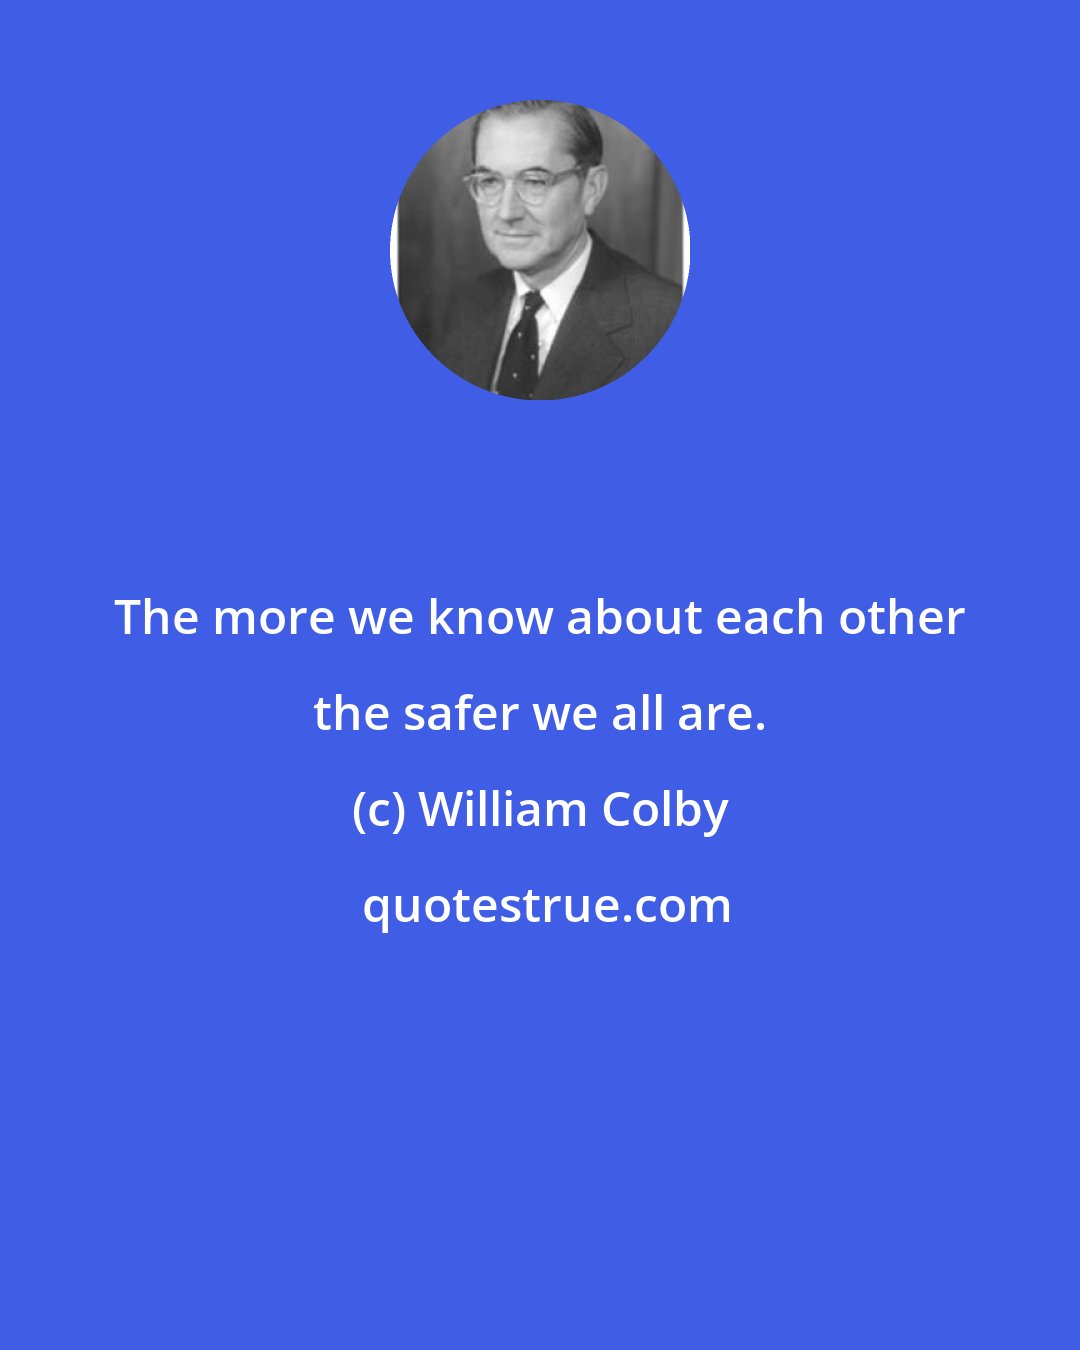 William Colby: The more we know about each other the safer we all are.